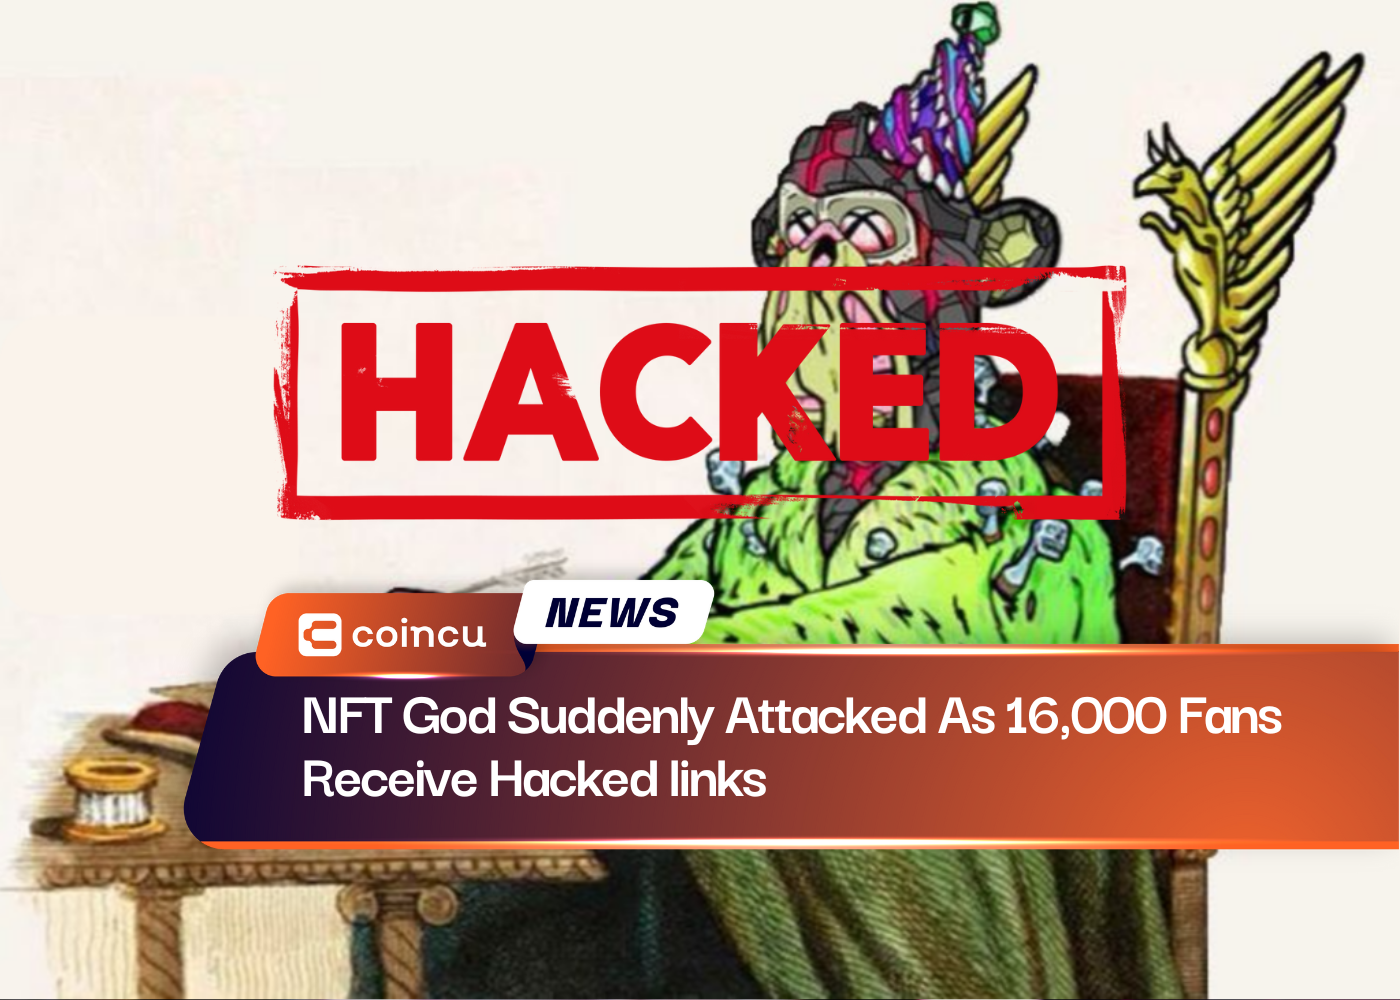 NFT God Suddenly Attacked As 16,000 Fans Receive Hacked links